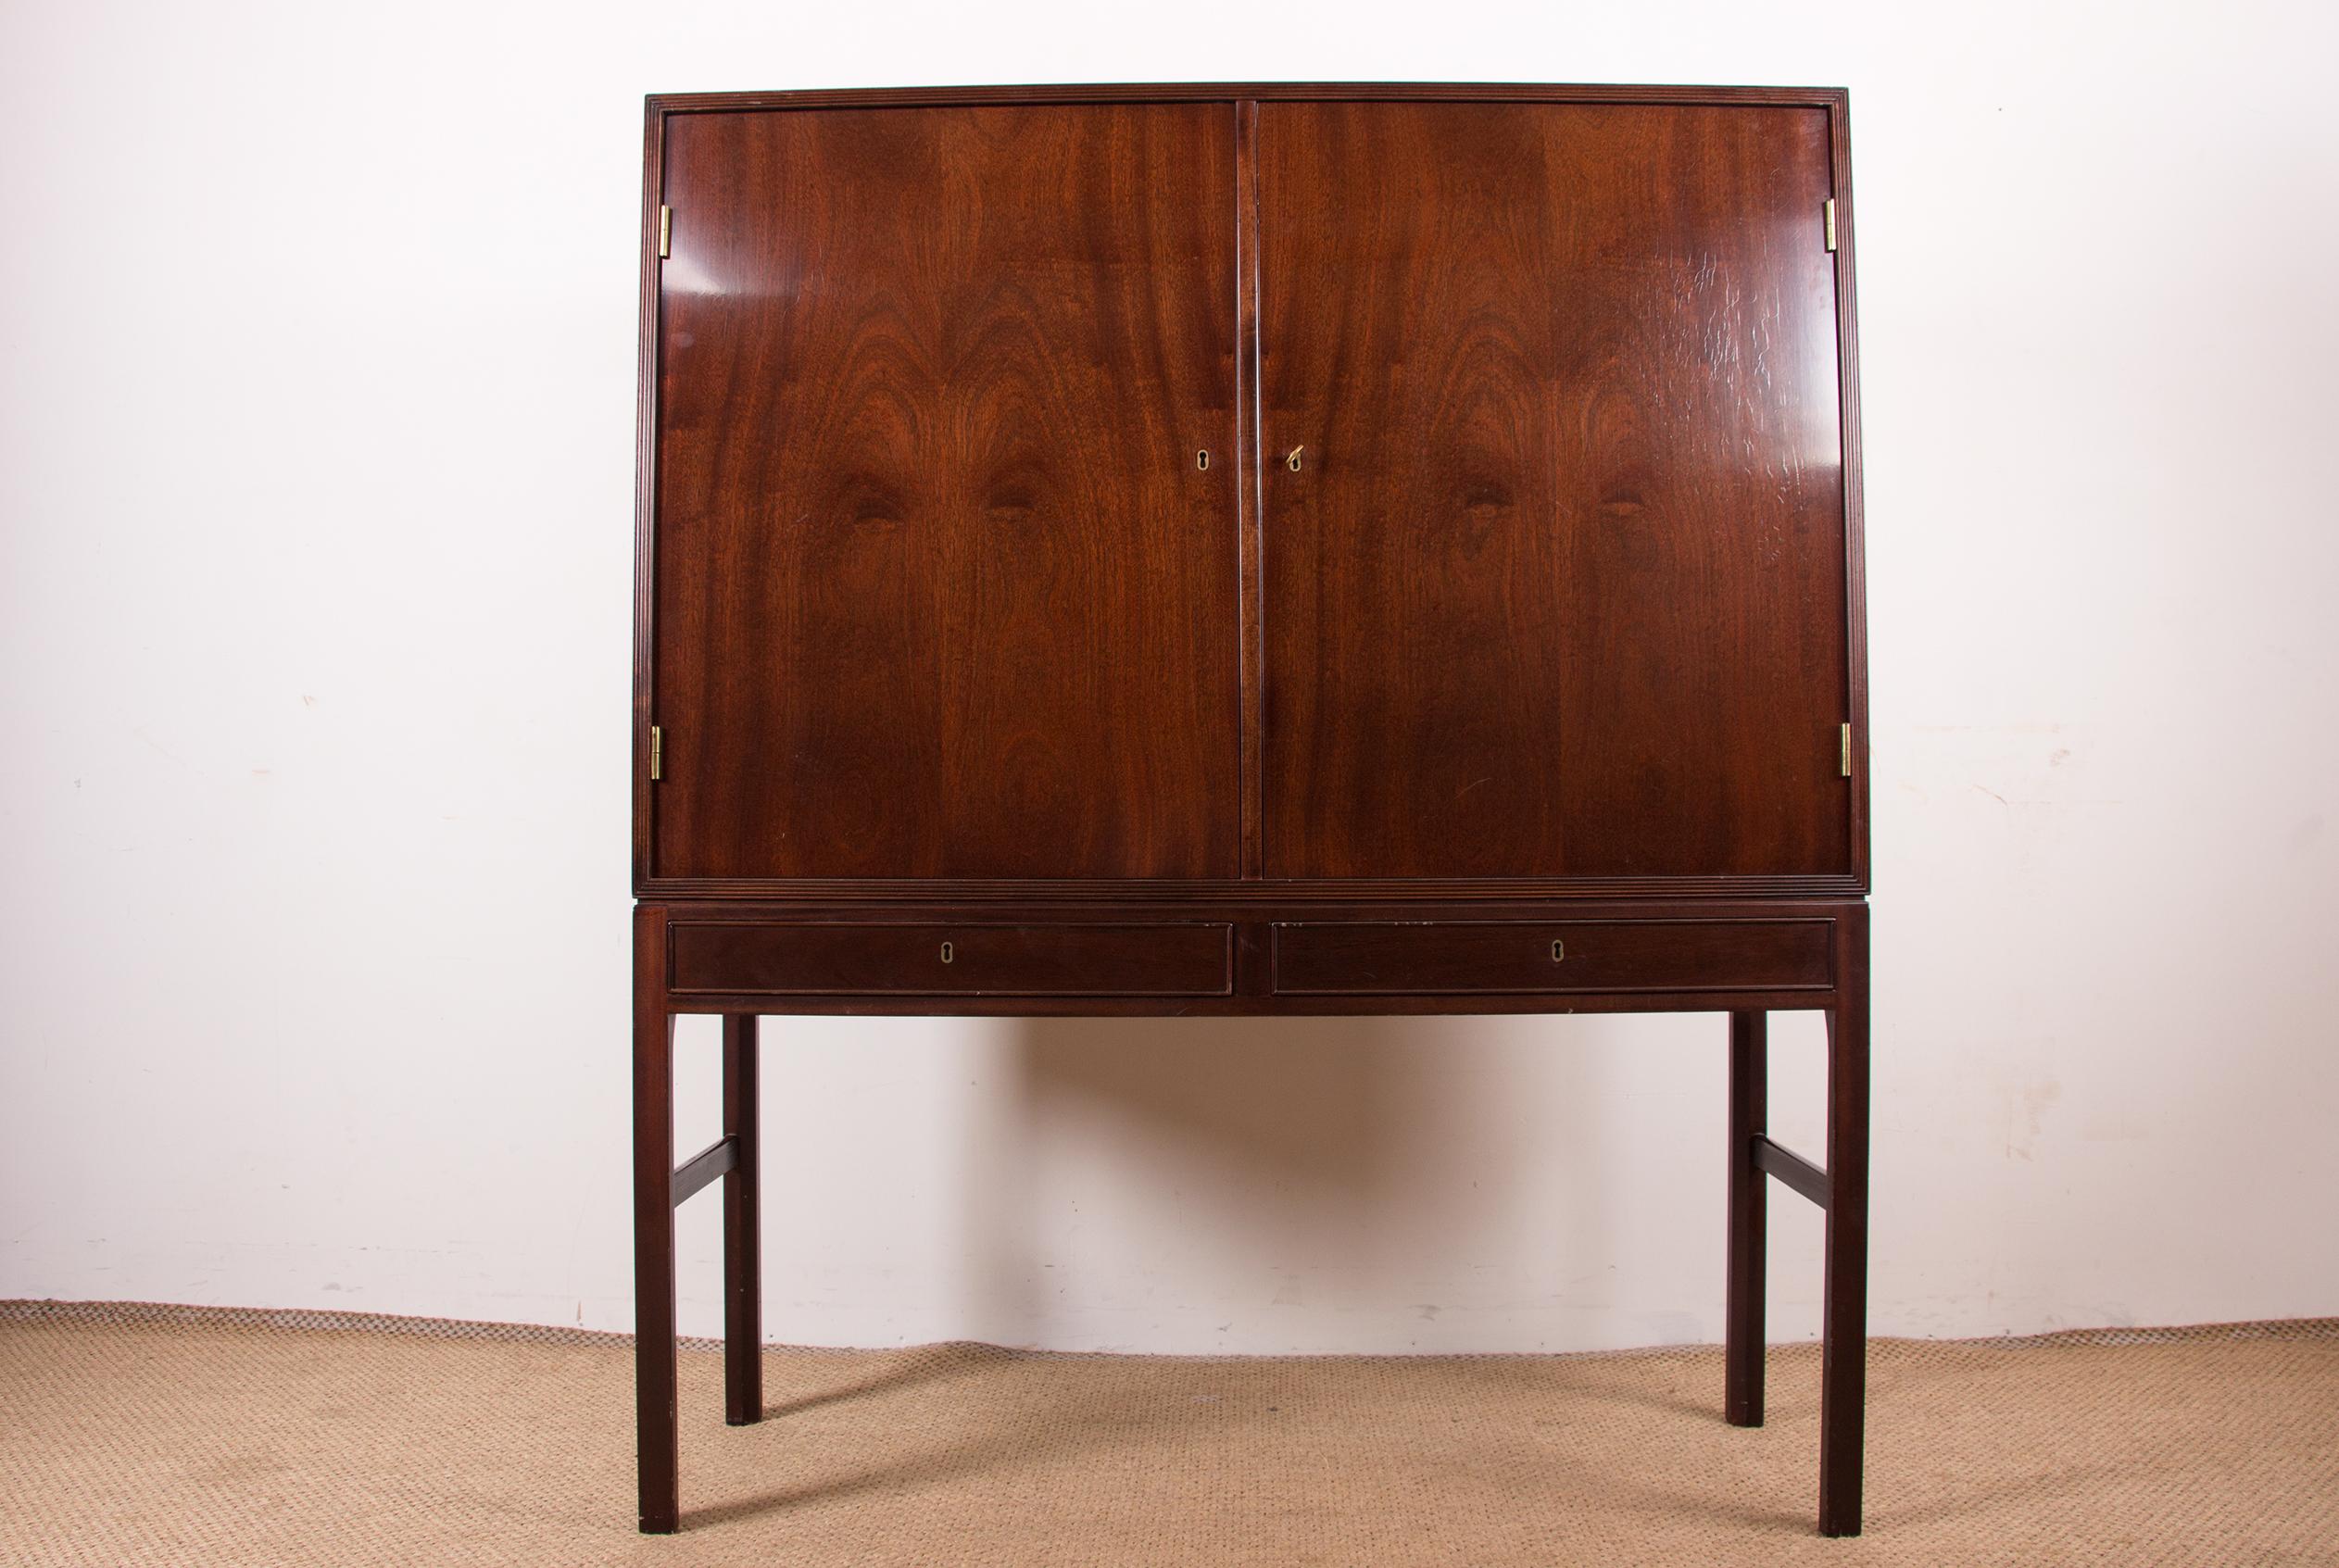 High Danish Cabinet in Mahogany and Brass by Ole Wanscher for Poul Jeppesen 1960 In Good Condition For Sale In JOINVILLE-LE-PONT, FR